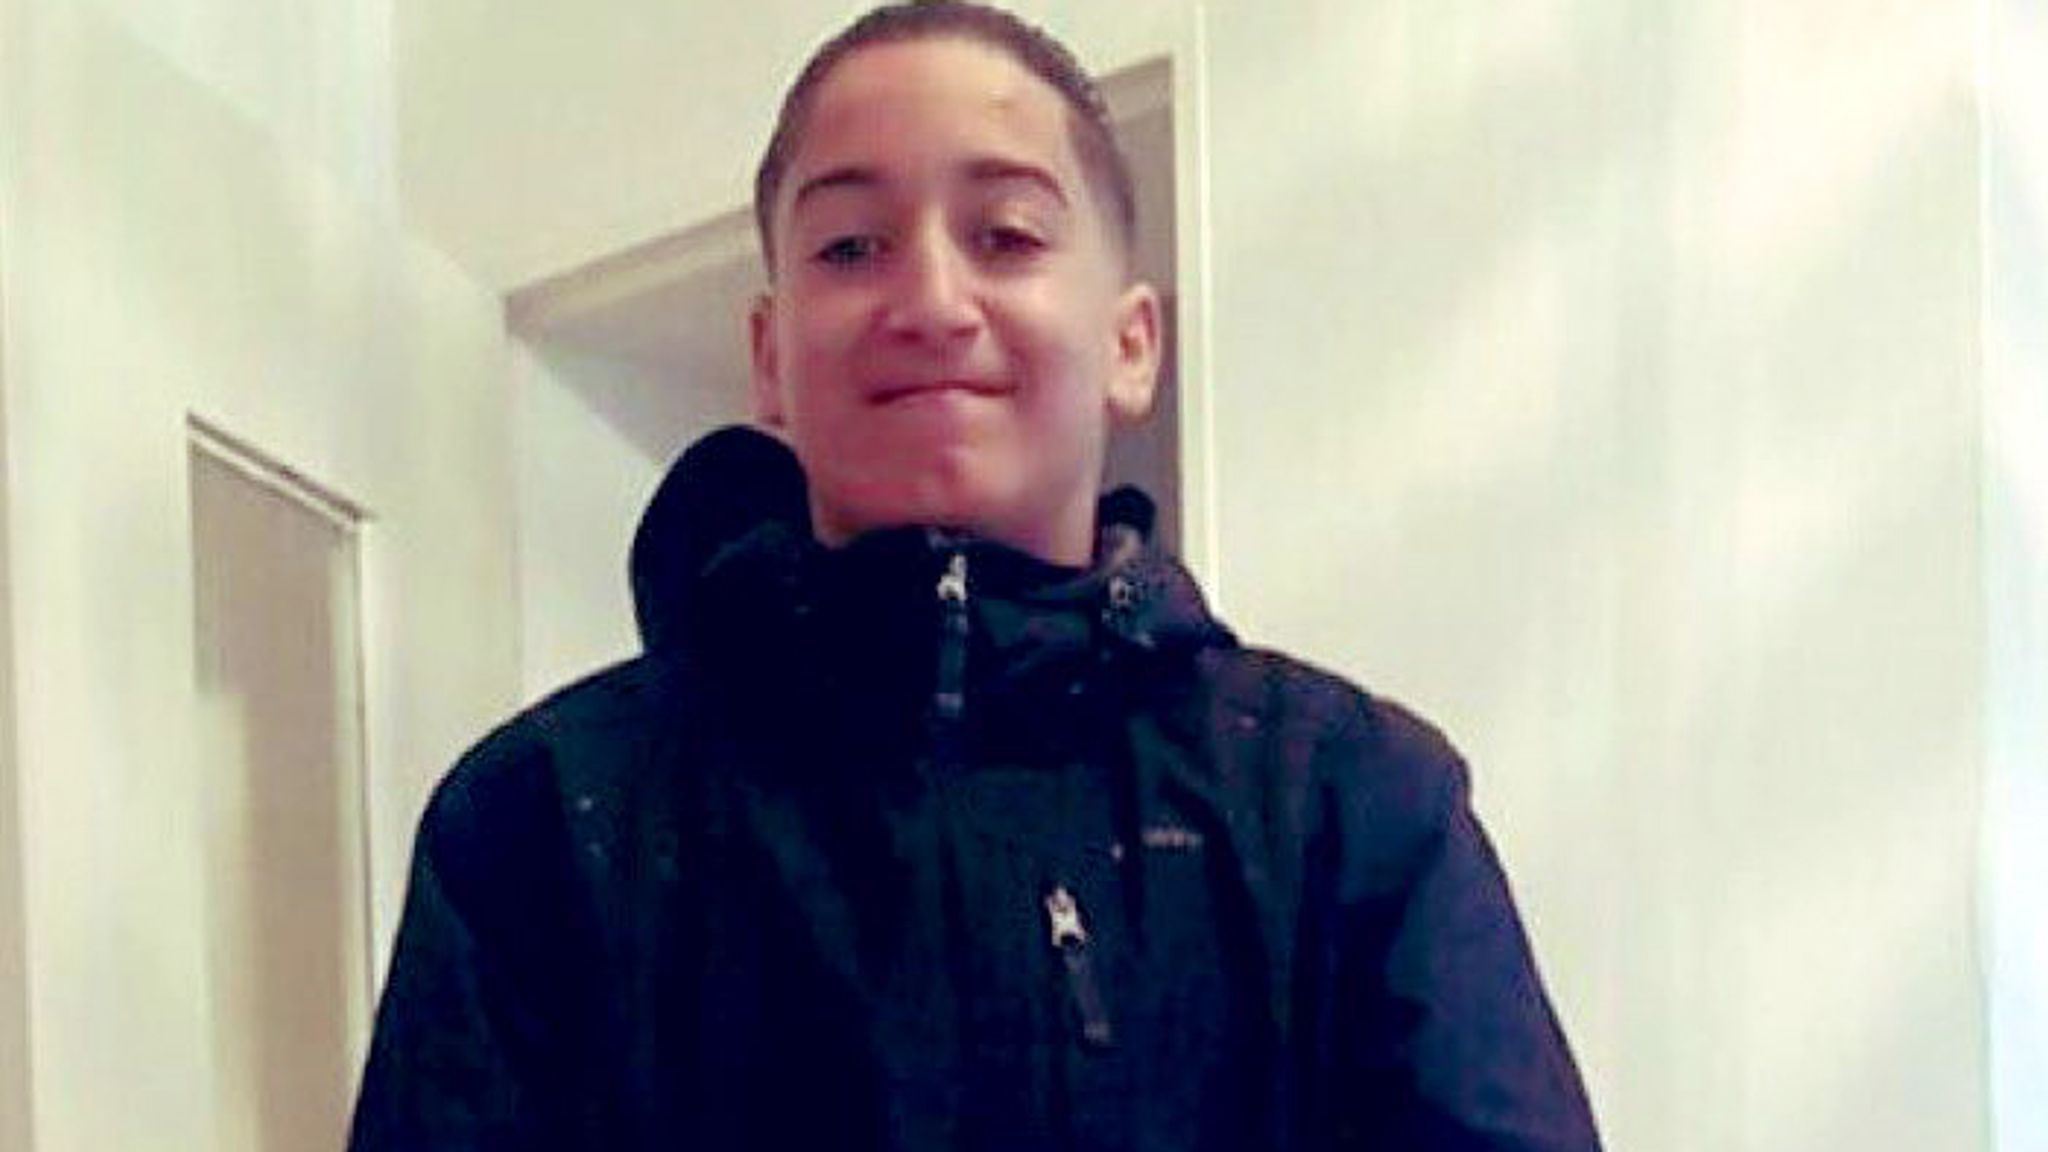 Nahel Merzouk, 17, who was of Algerian and Moroccan descent, was shot by a police officer during a traffic stop on Tuesday in the Paris suburb of Nanterre.